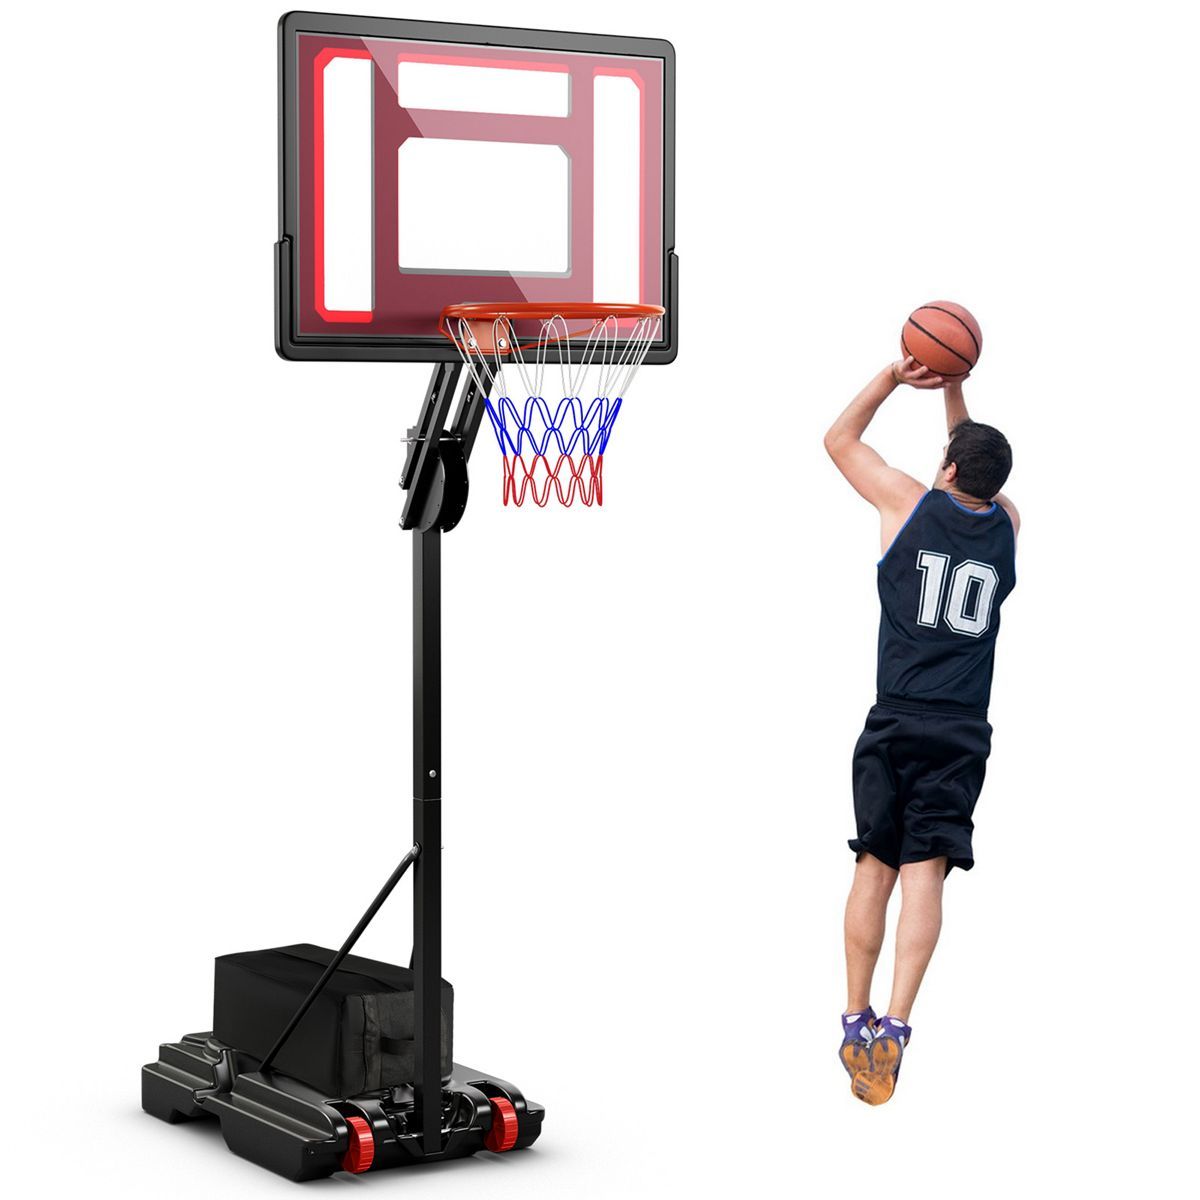 Costway Portable Basketball Hoop System 5-10 FT Adjustable with Weight Bag Wheels Outdoor | Target